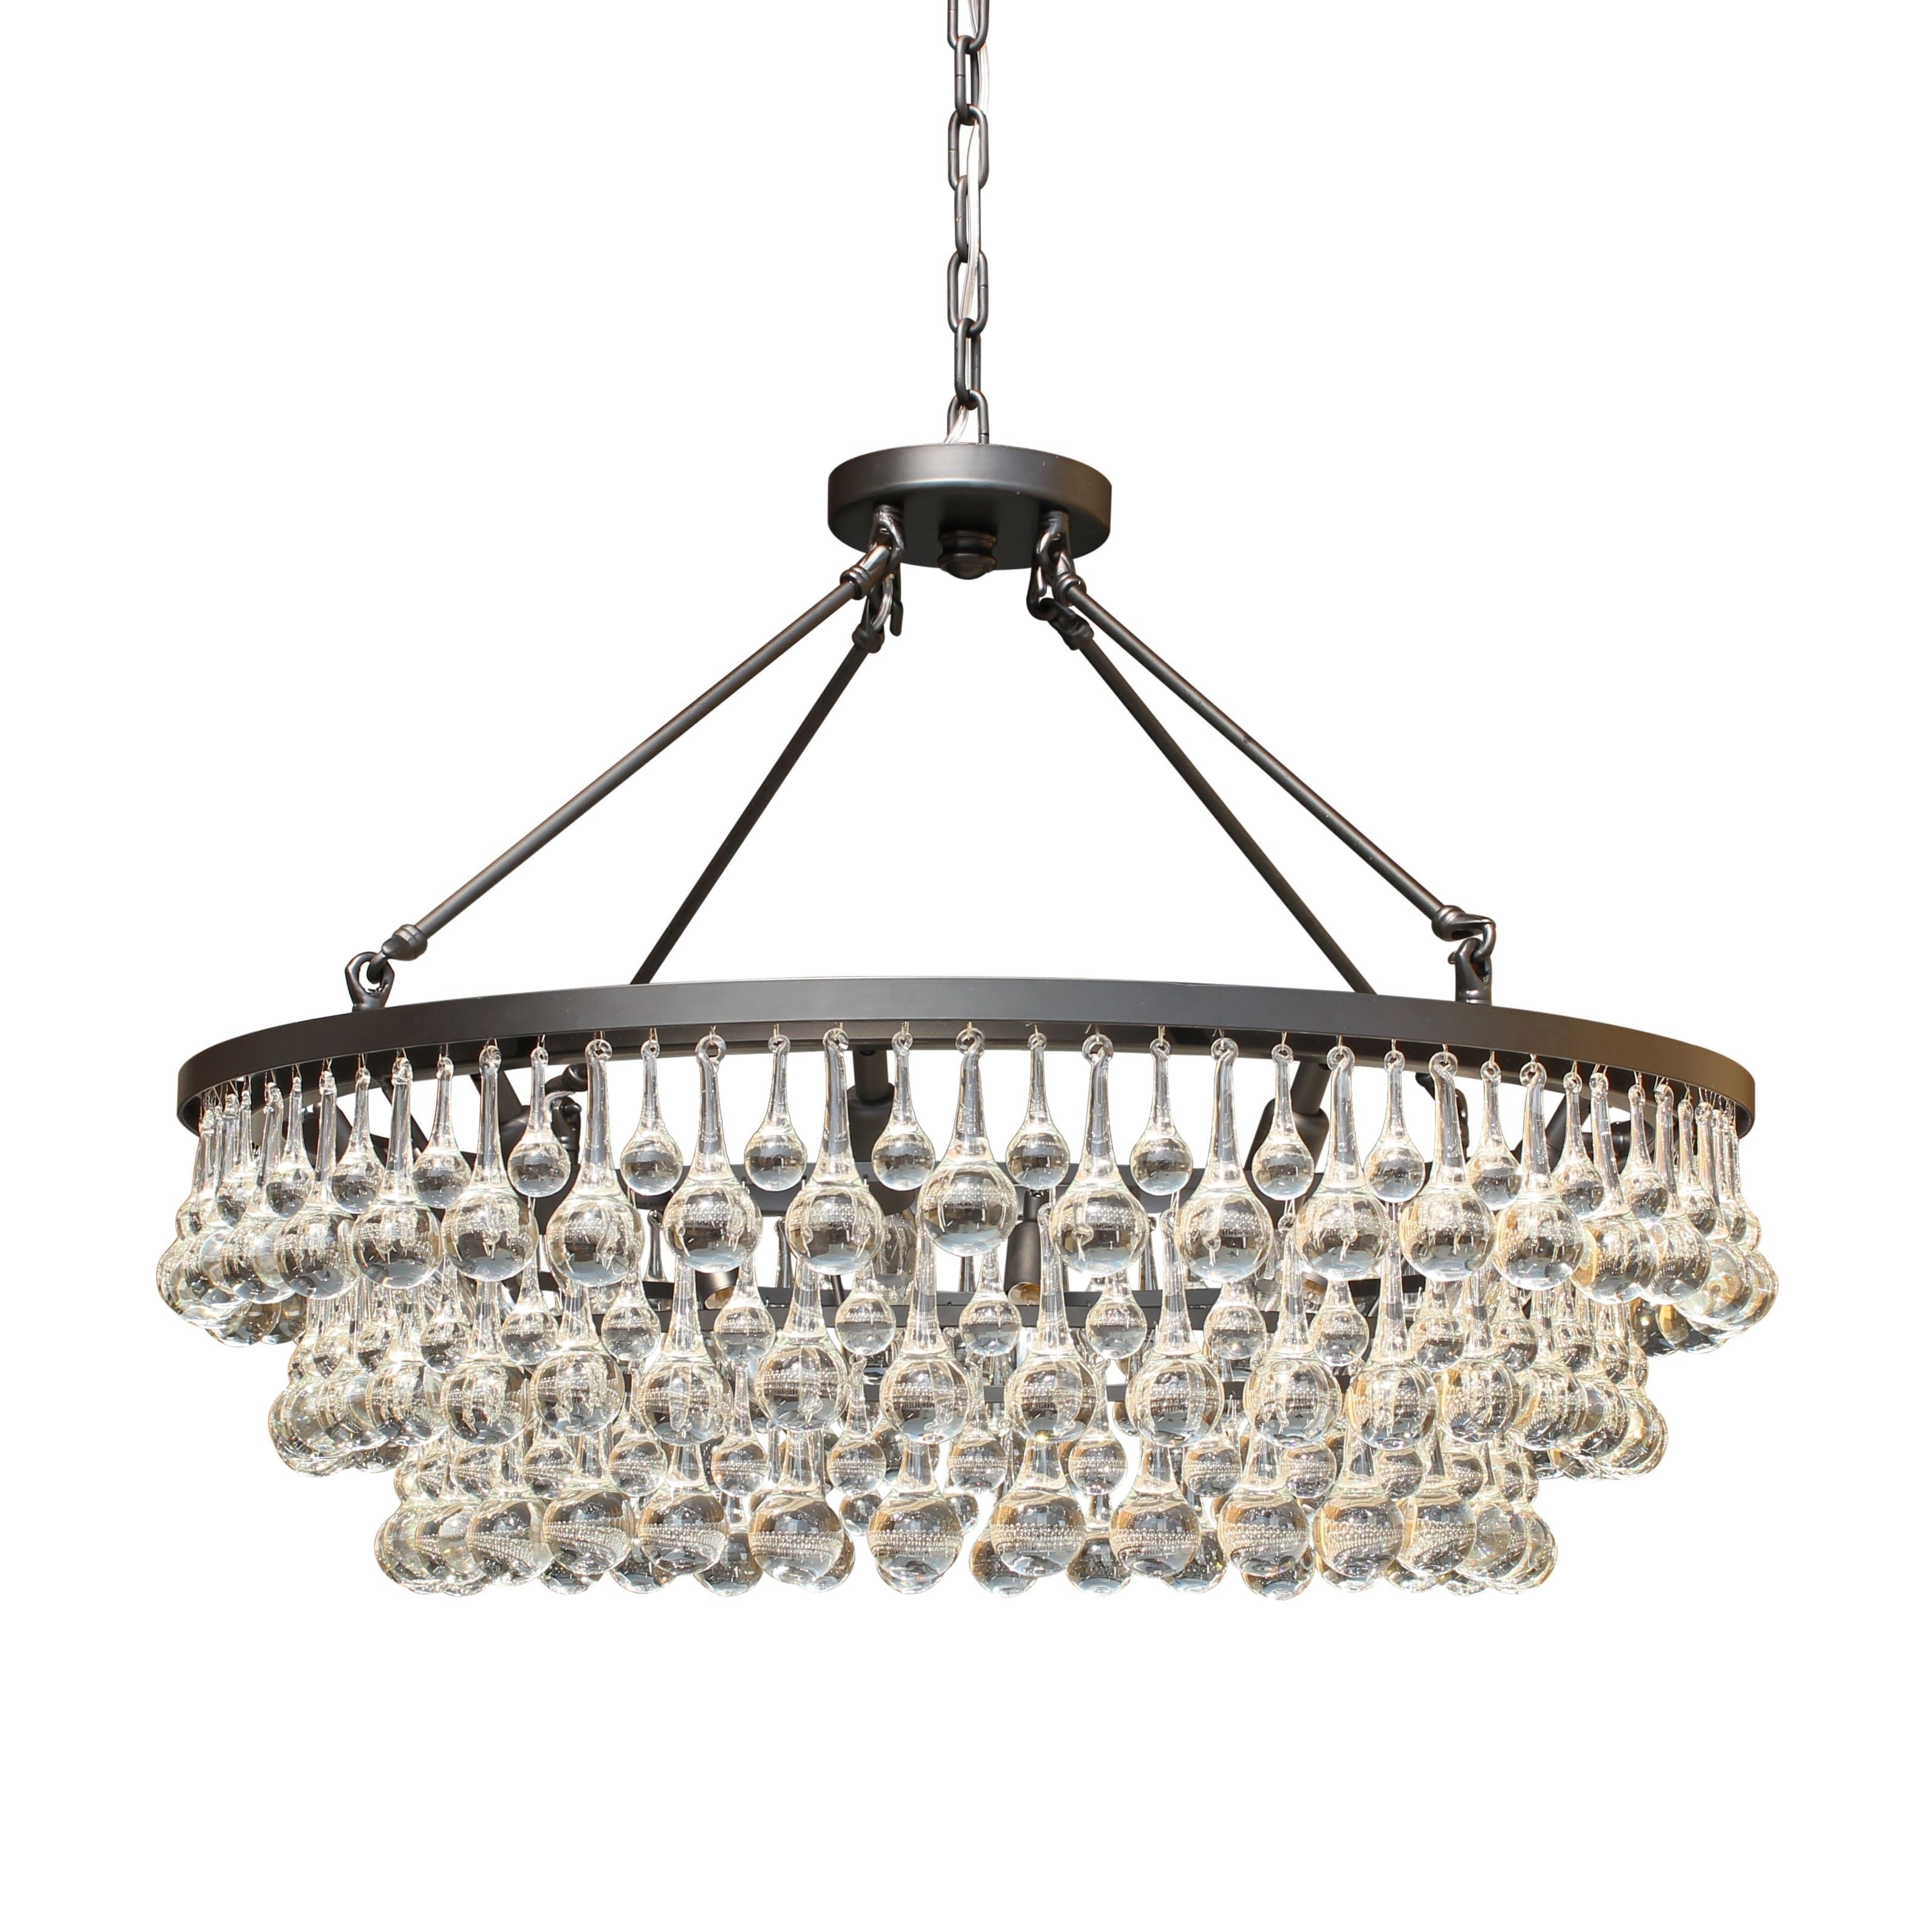 Yes Thumbnail 0 | Tamara Final | Glass Chandelier Within Mcknight 9 Light Chandeliers (View 15 of 30)